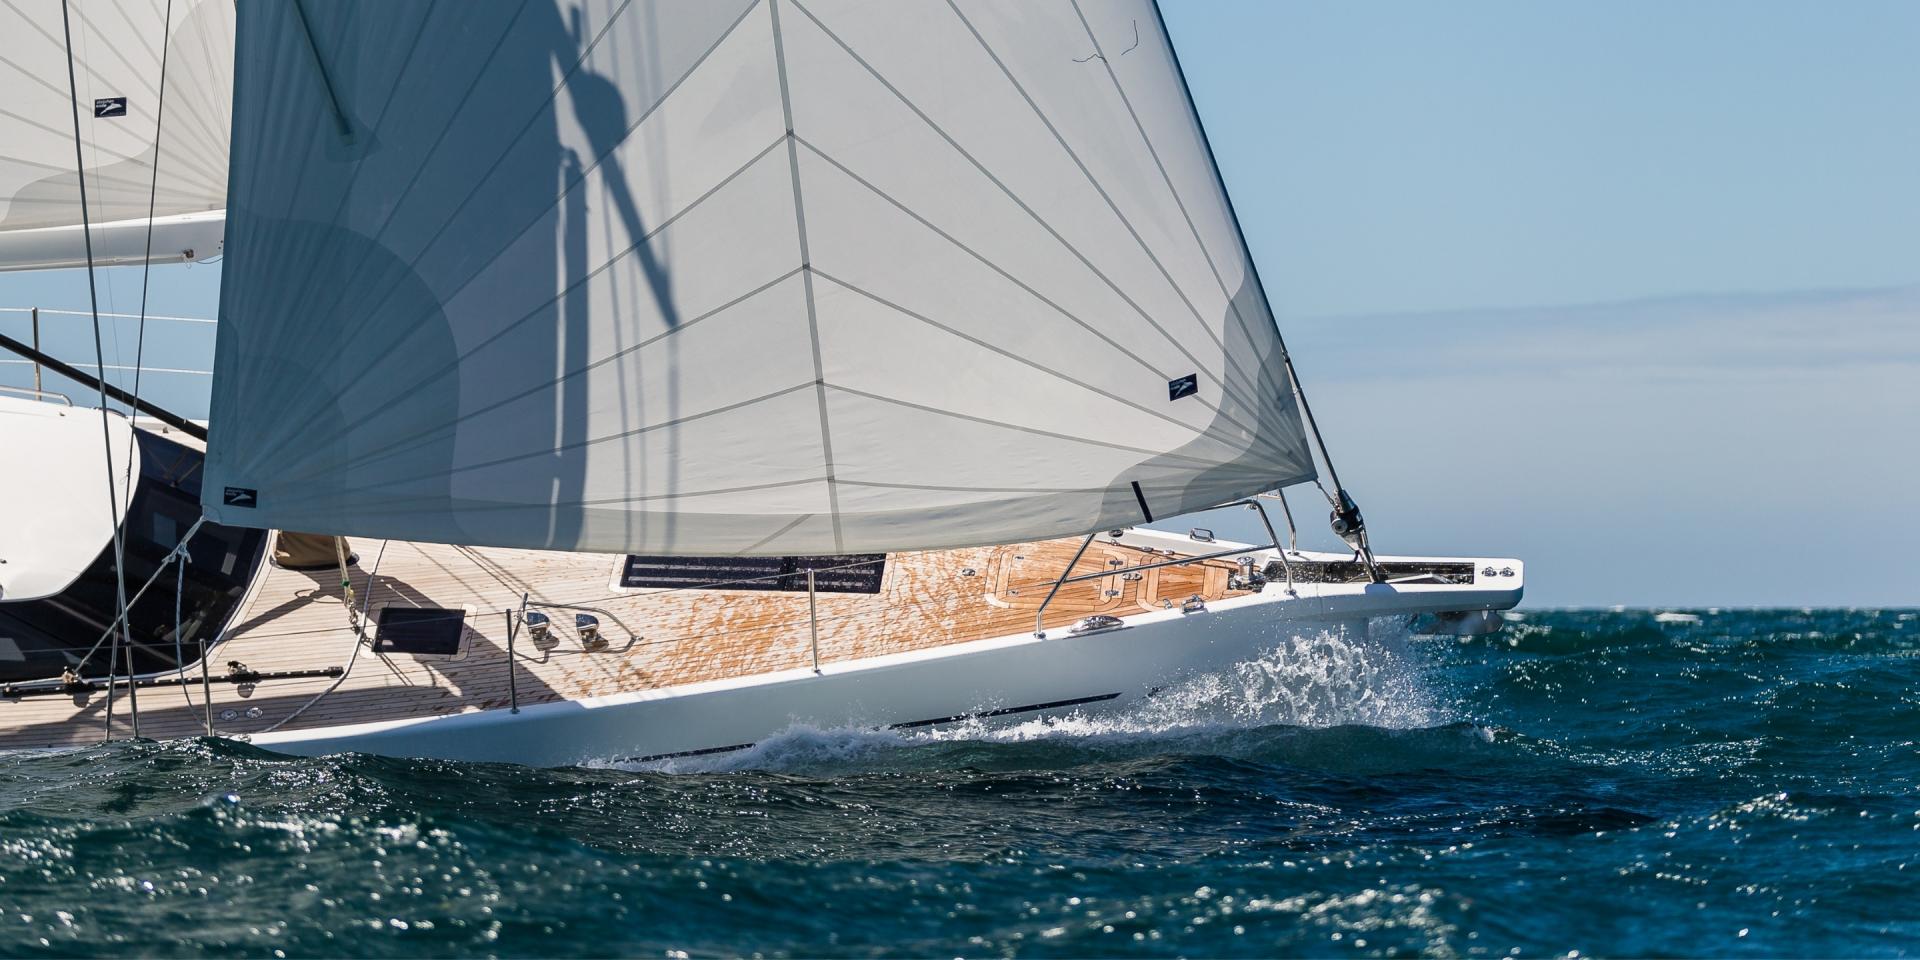 oyster yachts apprenticeship